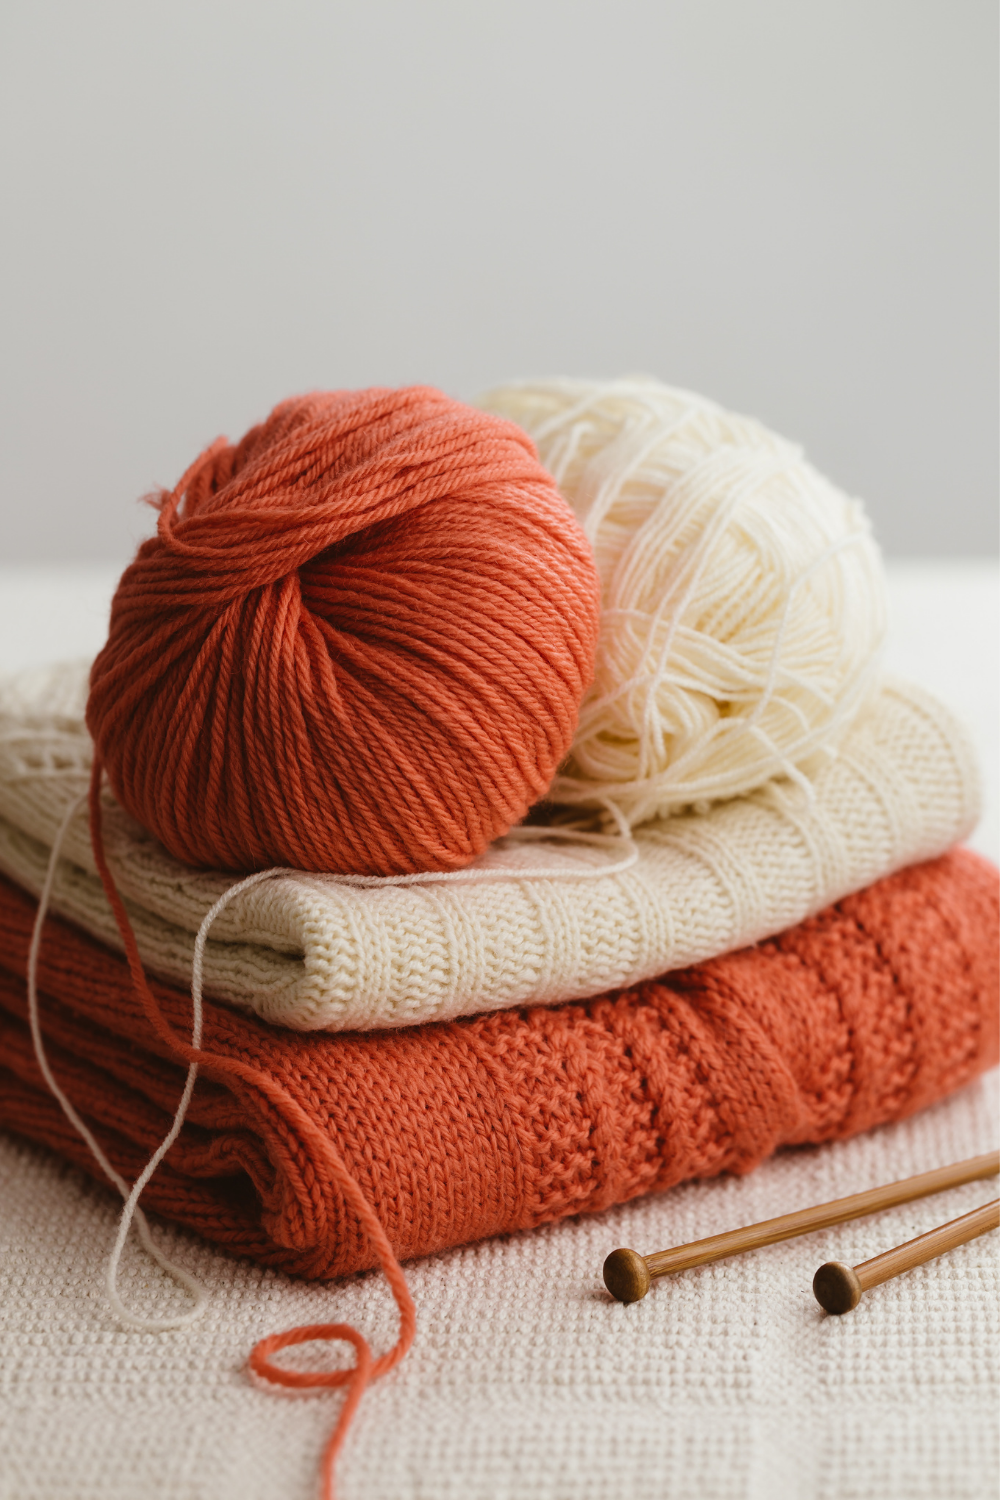 Tips to Improve Your Knitting